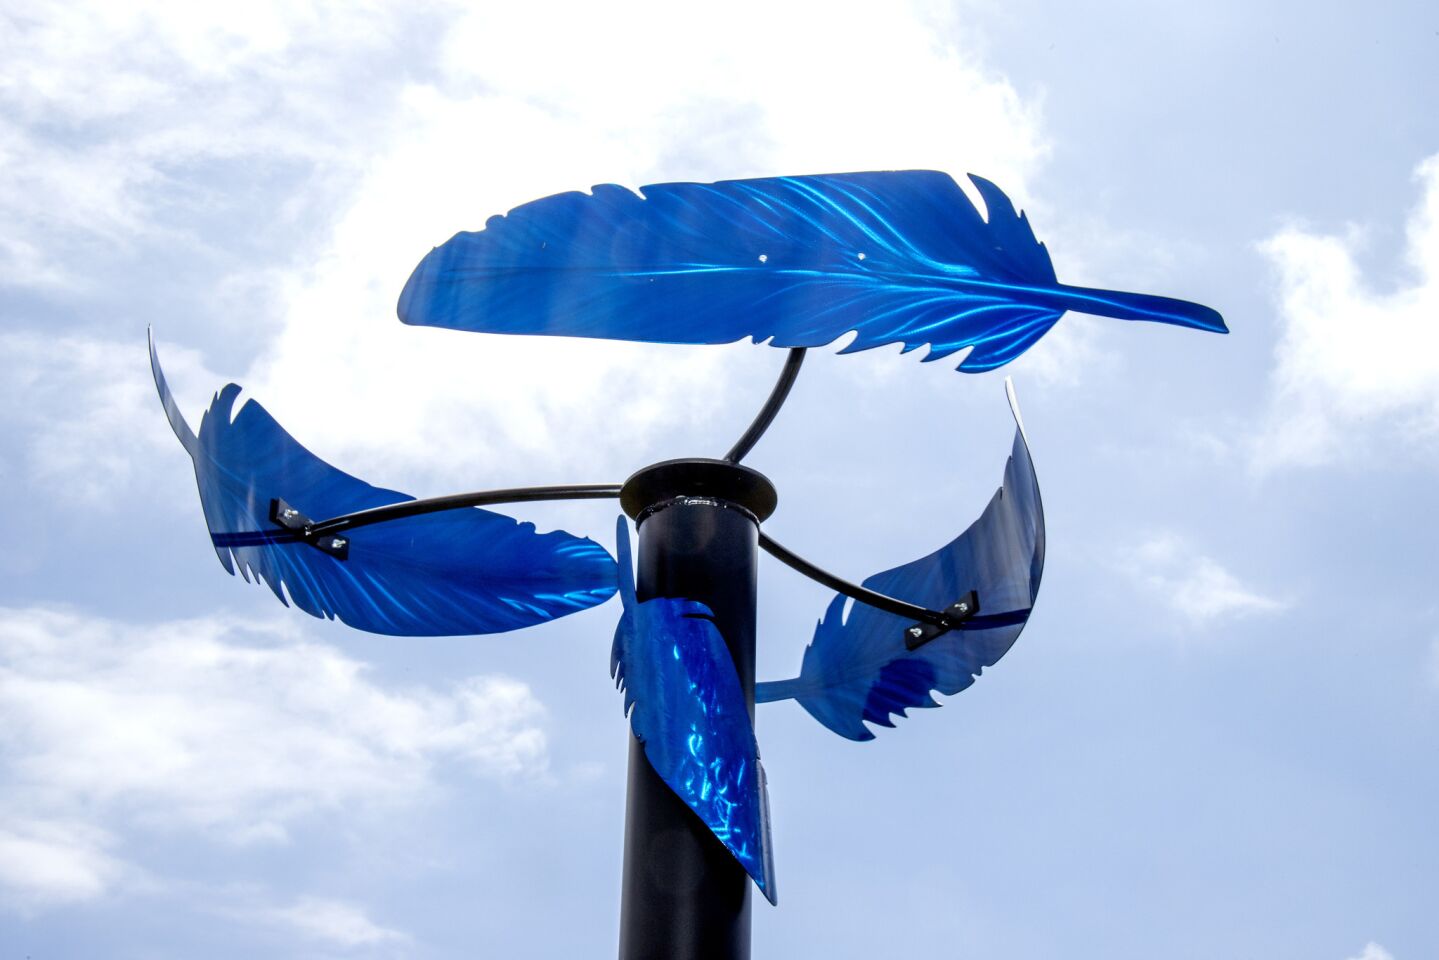 "Feathers in the Wind" by Alex G is on display at Newport Beach’s Civic Center Park on Saturday.